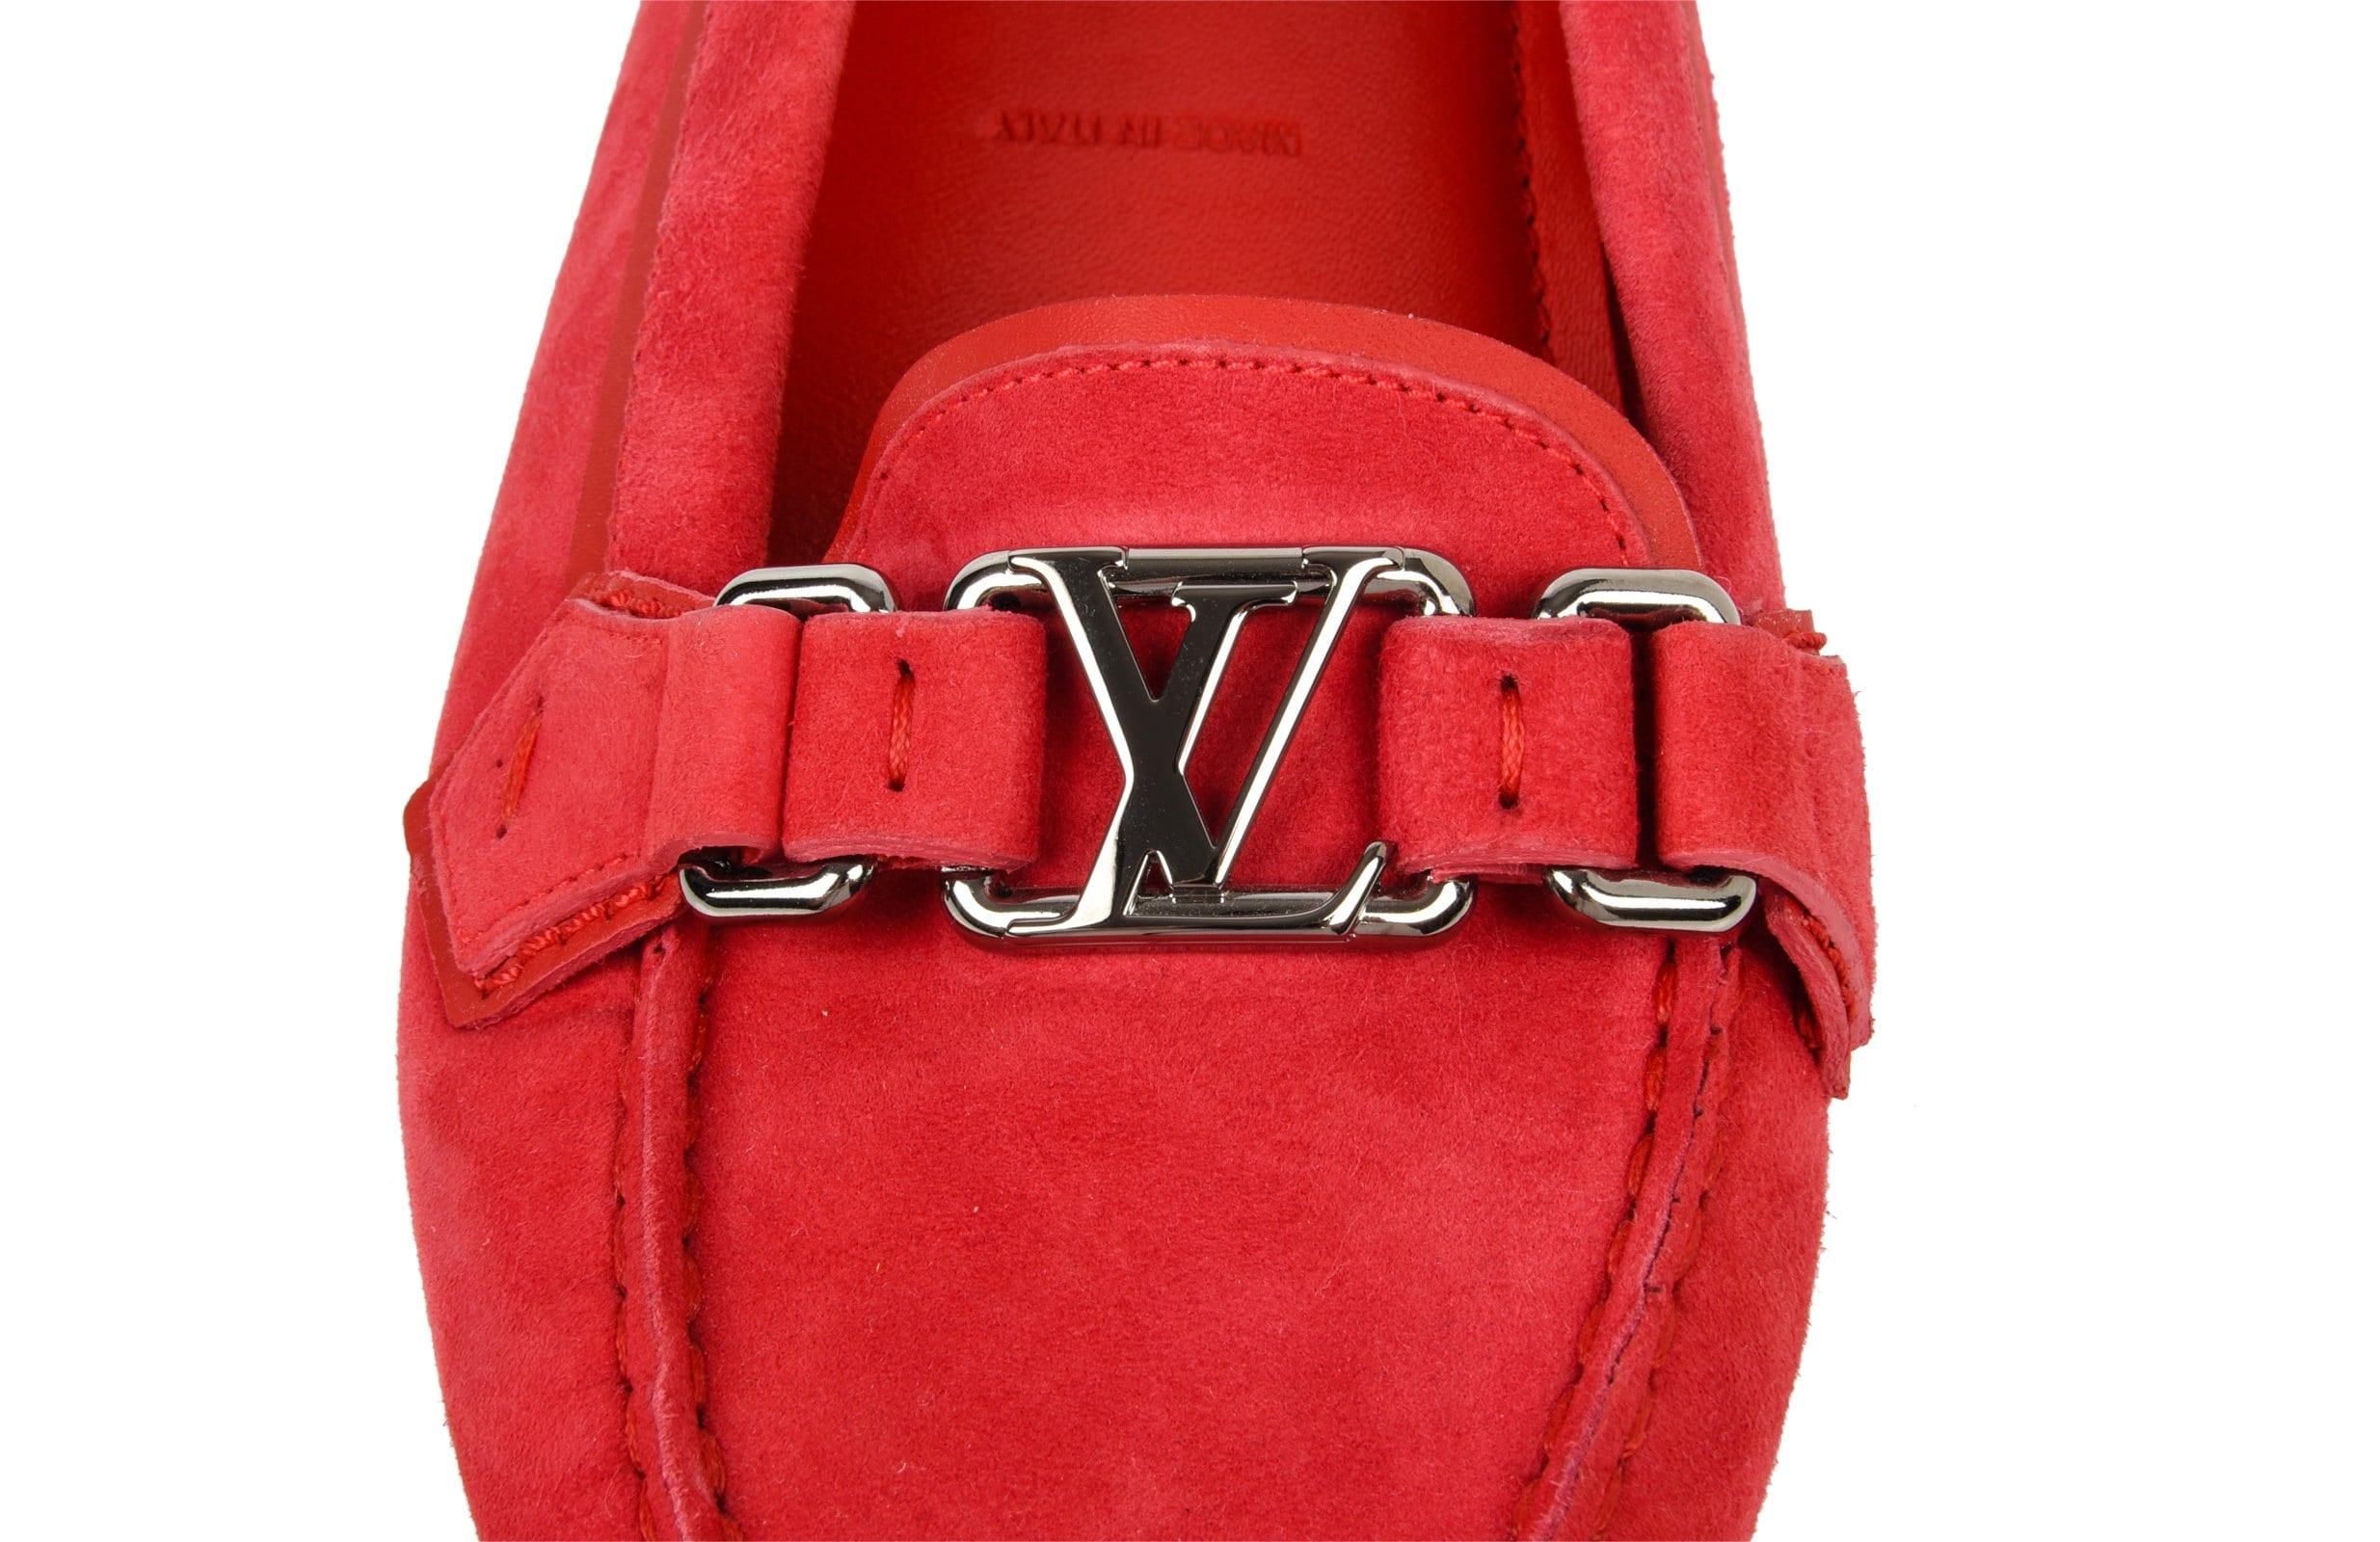 Louis Vuitton Red Heels for Women for sale